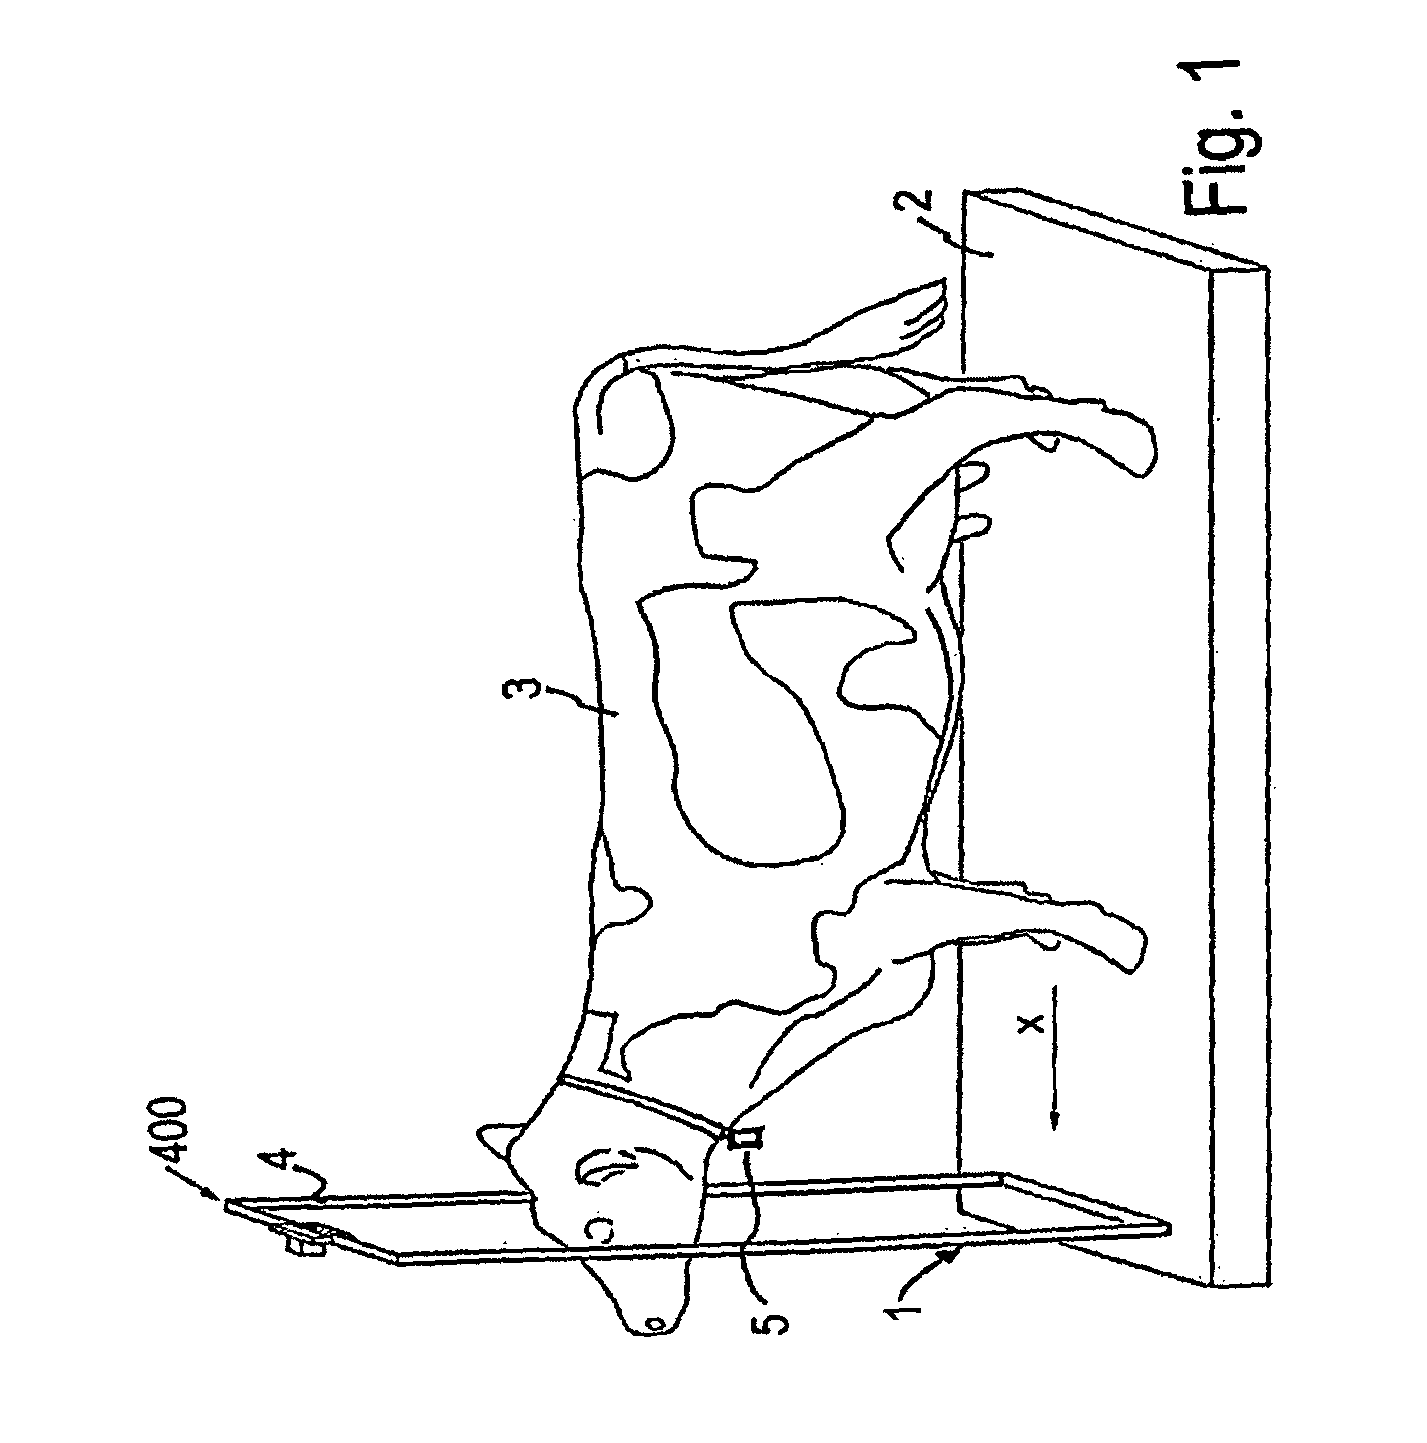 Device and a method for providing information about animals when walking through an animal passage